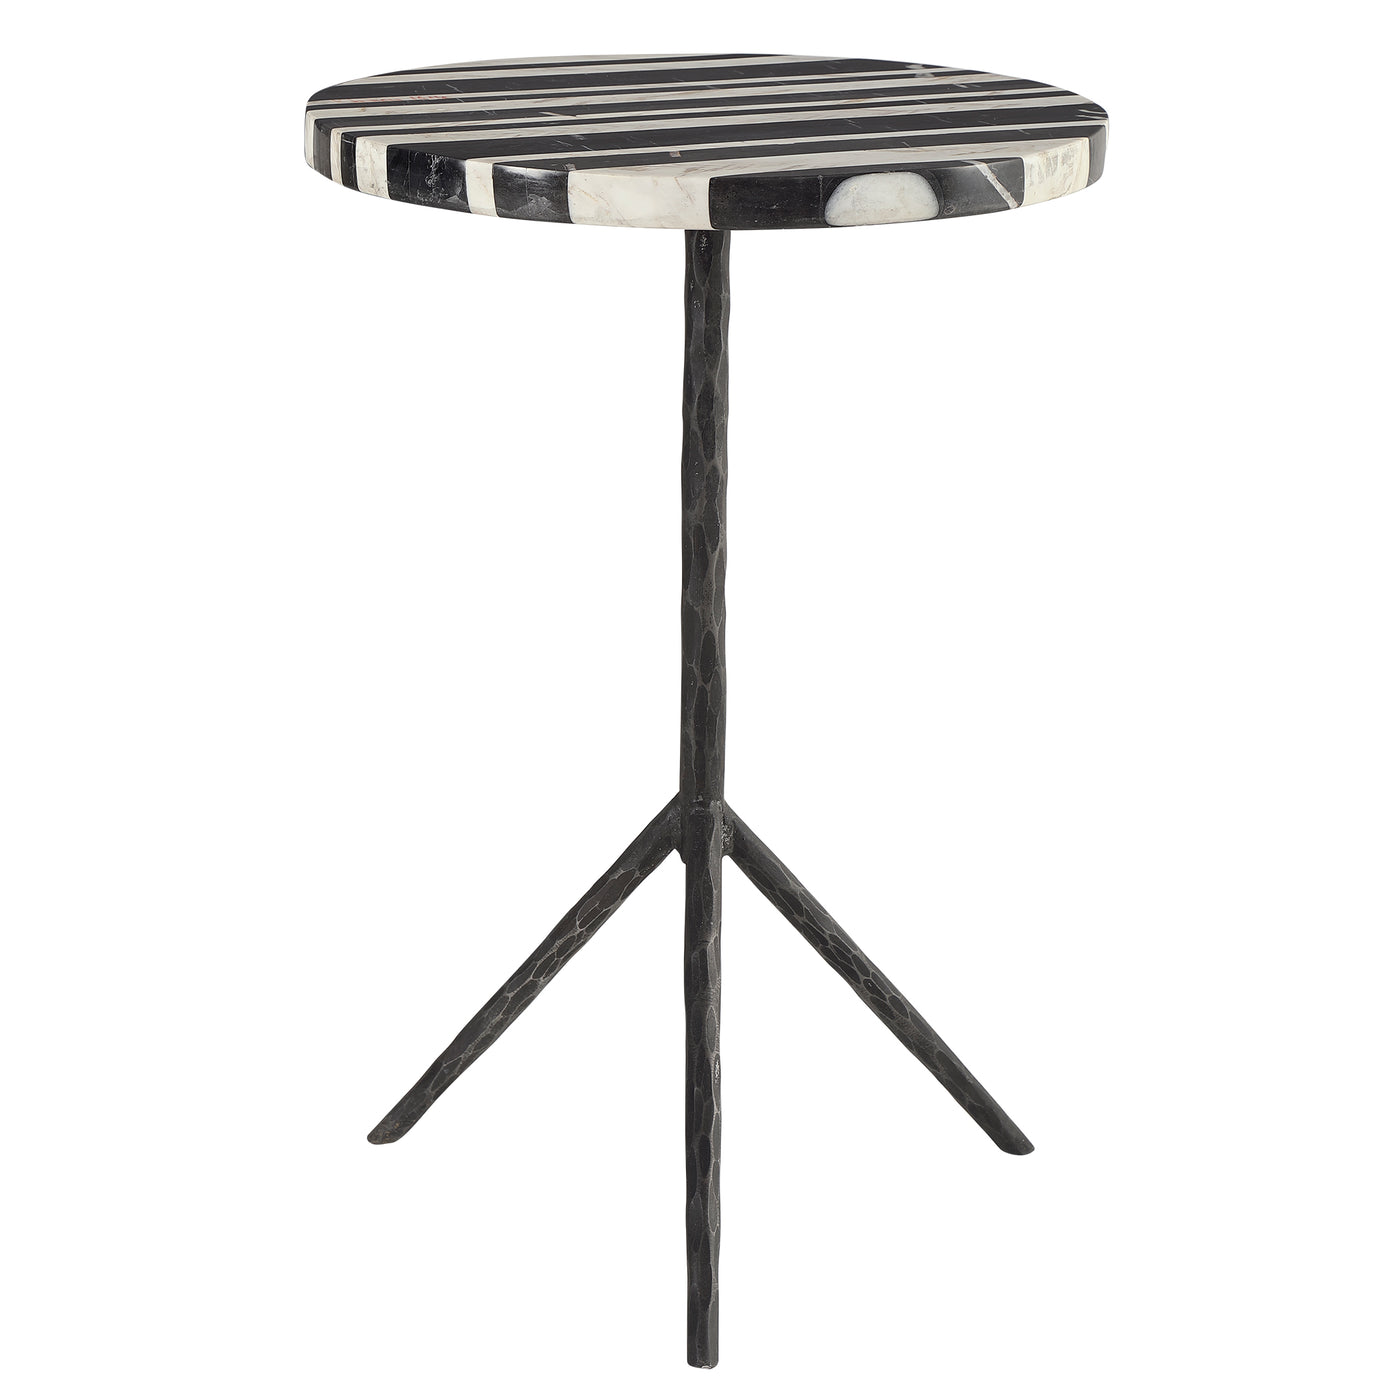 A Unique Blend Of Classic And Modern Details, This Round Accent Table Showcases An Asymmetrically Striped Black And White ...